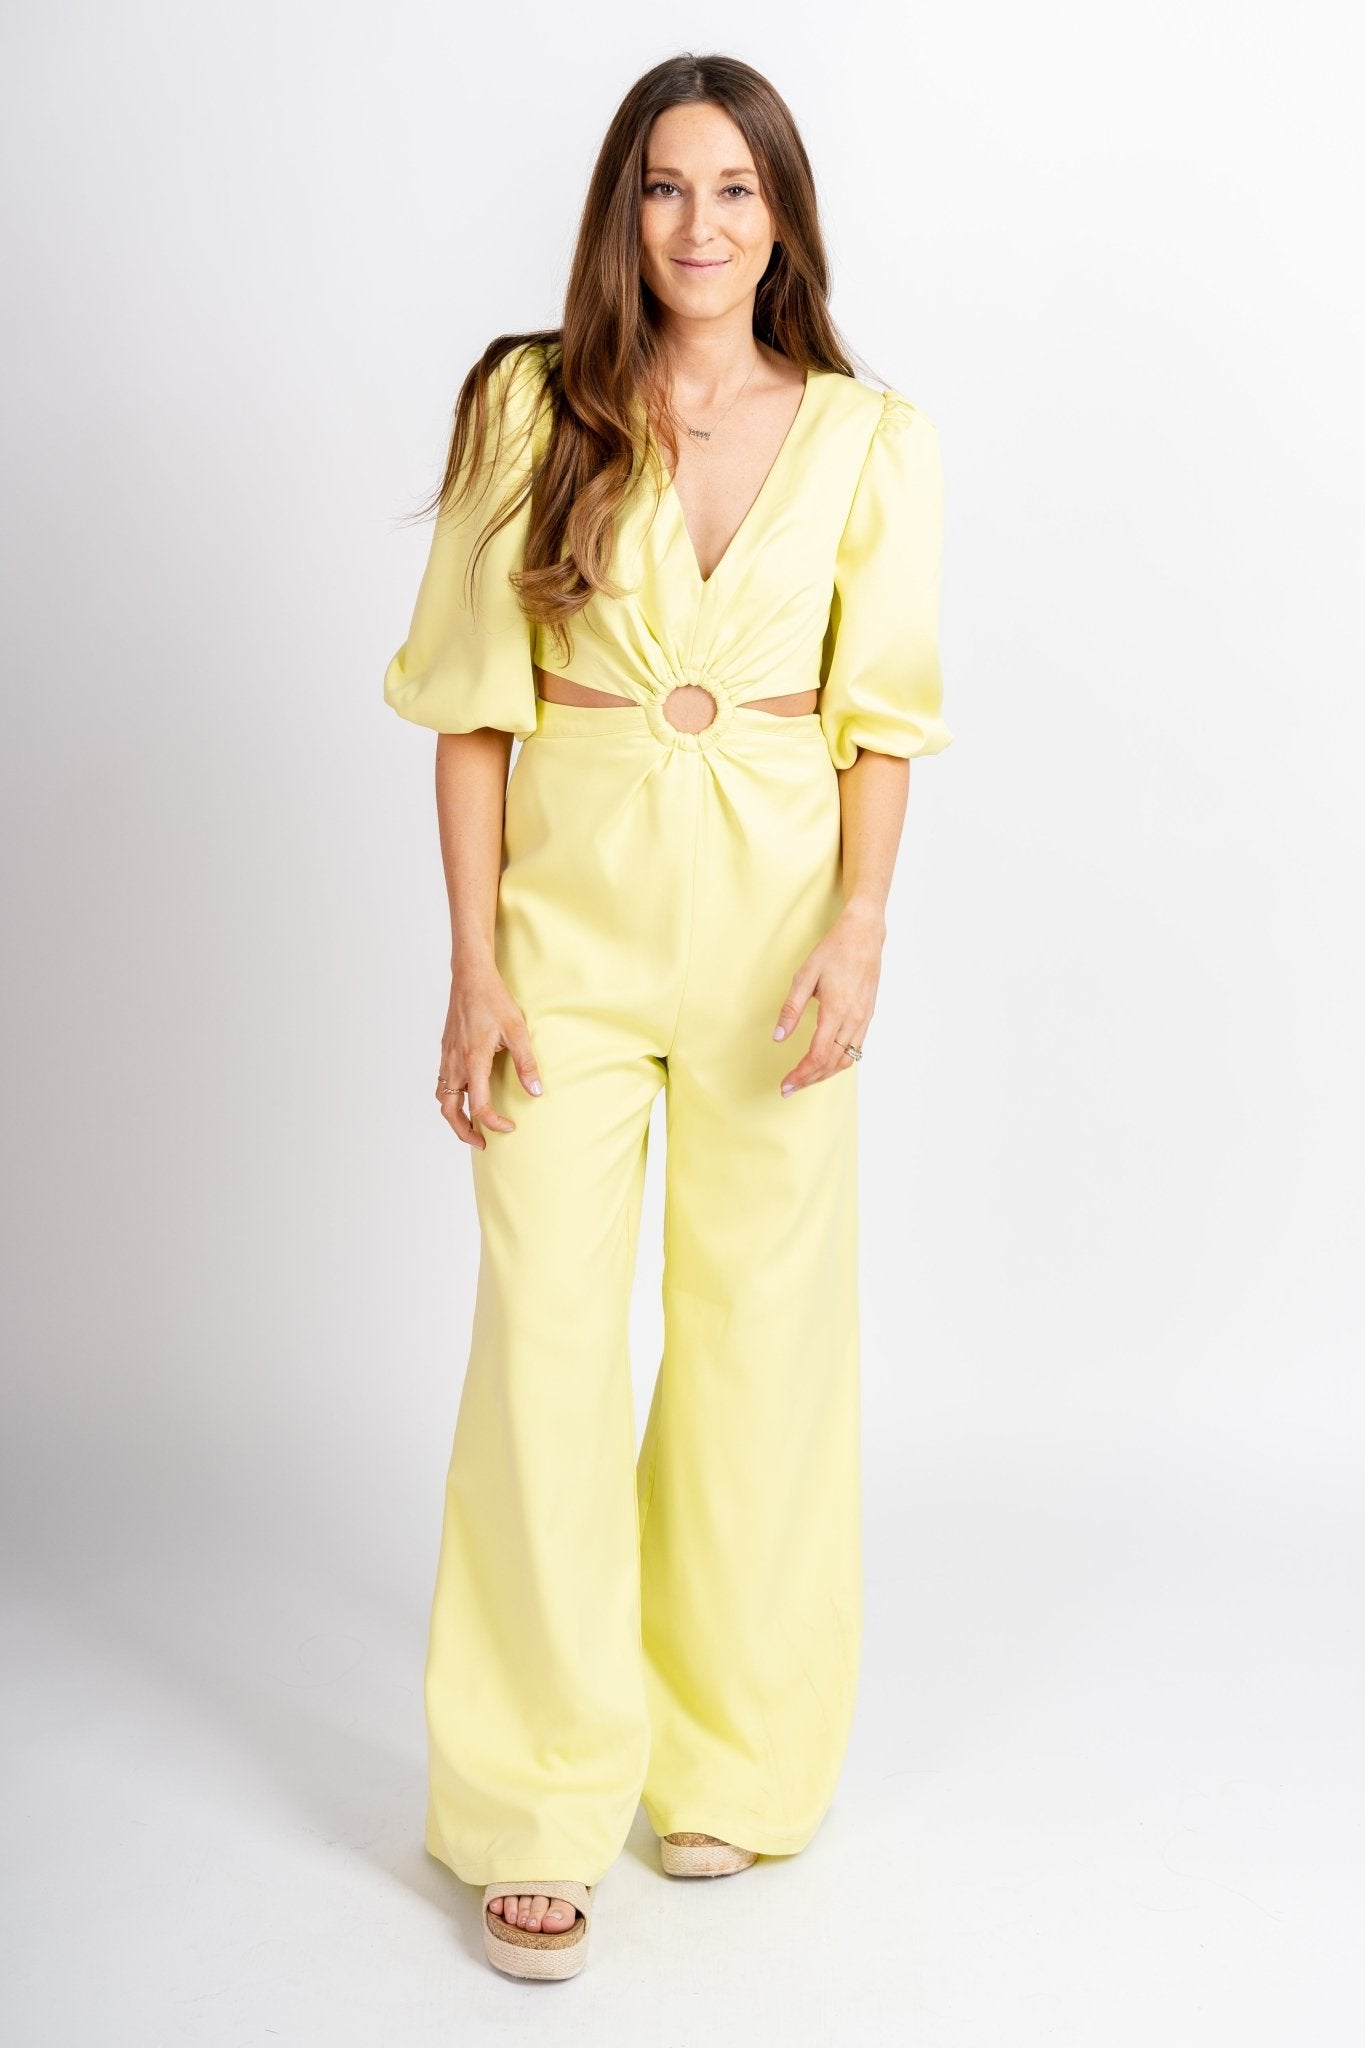 O ring detail jumpsuit soft lime - Stylish jumpsuit - Trendy Staycation Outfits at Lush Fashion Lounge Boutique in Oklahoma City